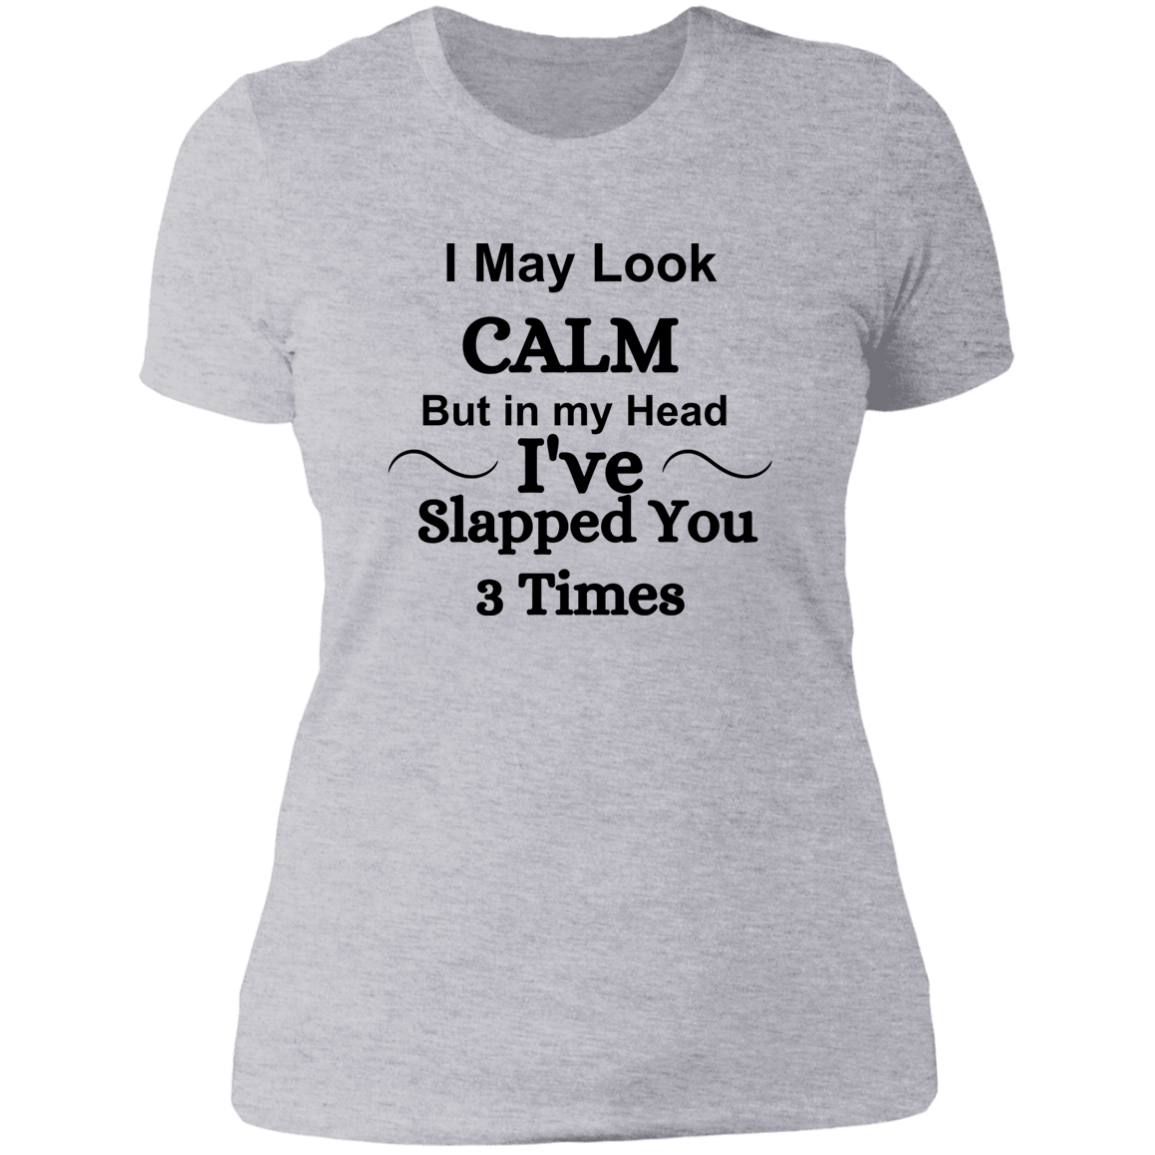 I May Look Calm Women's Tee Blk Lettering